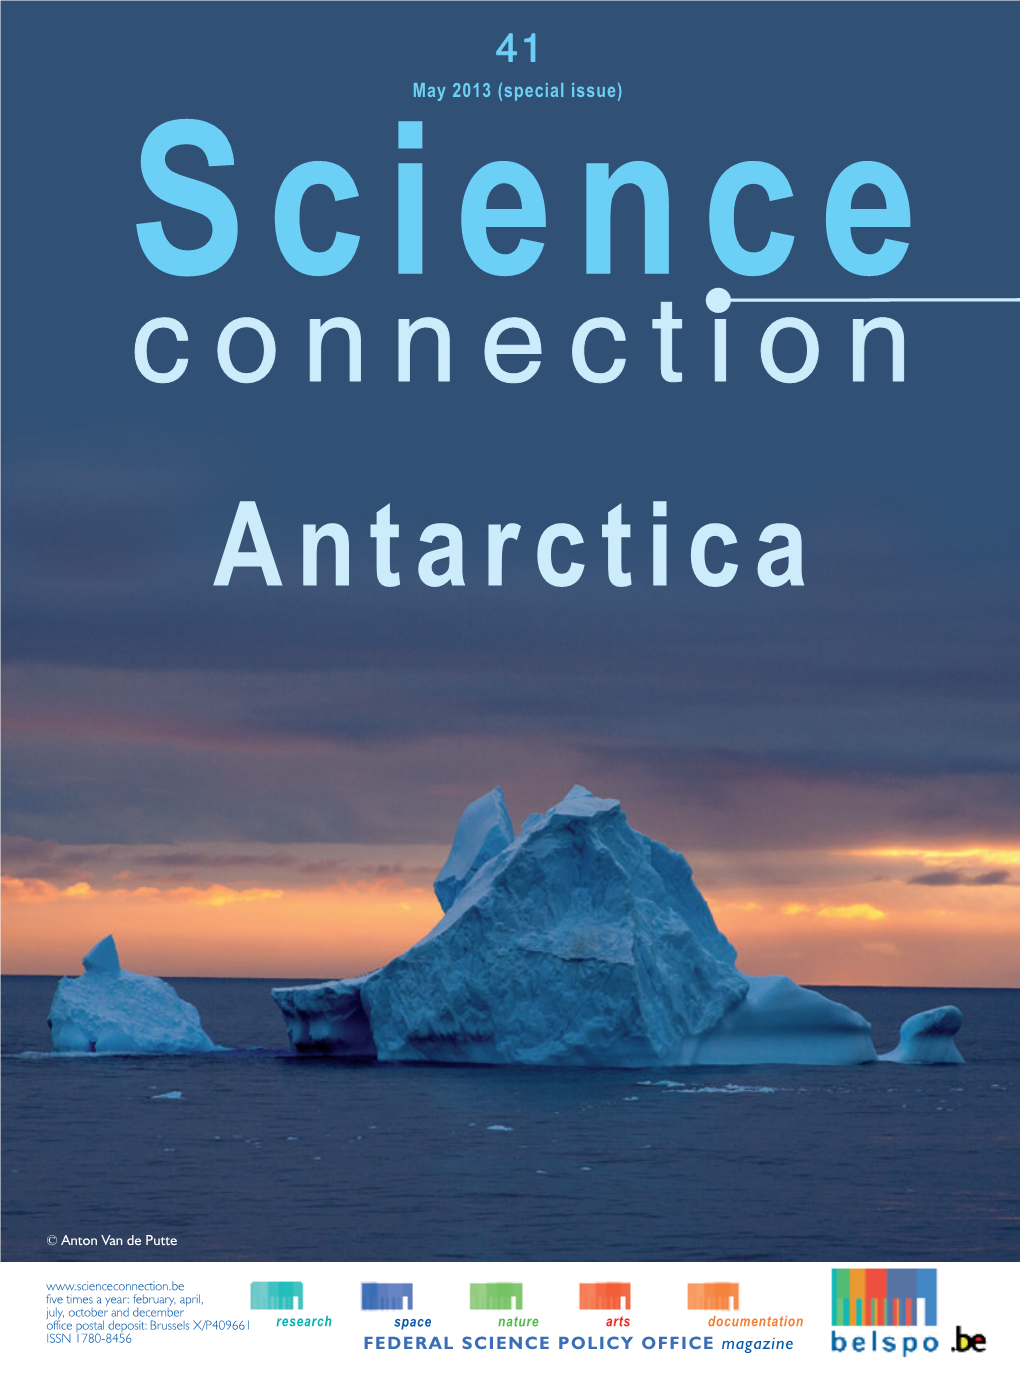 Of the Southern Oceans to This Report Also Extensively Discusses the Warming of an - the Greatest Extent Possible, Where the CCAMLR (Conven - Tarctica and Its Impact